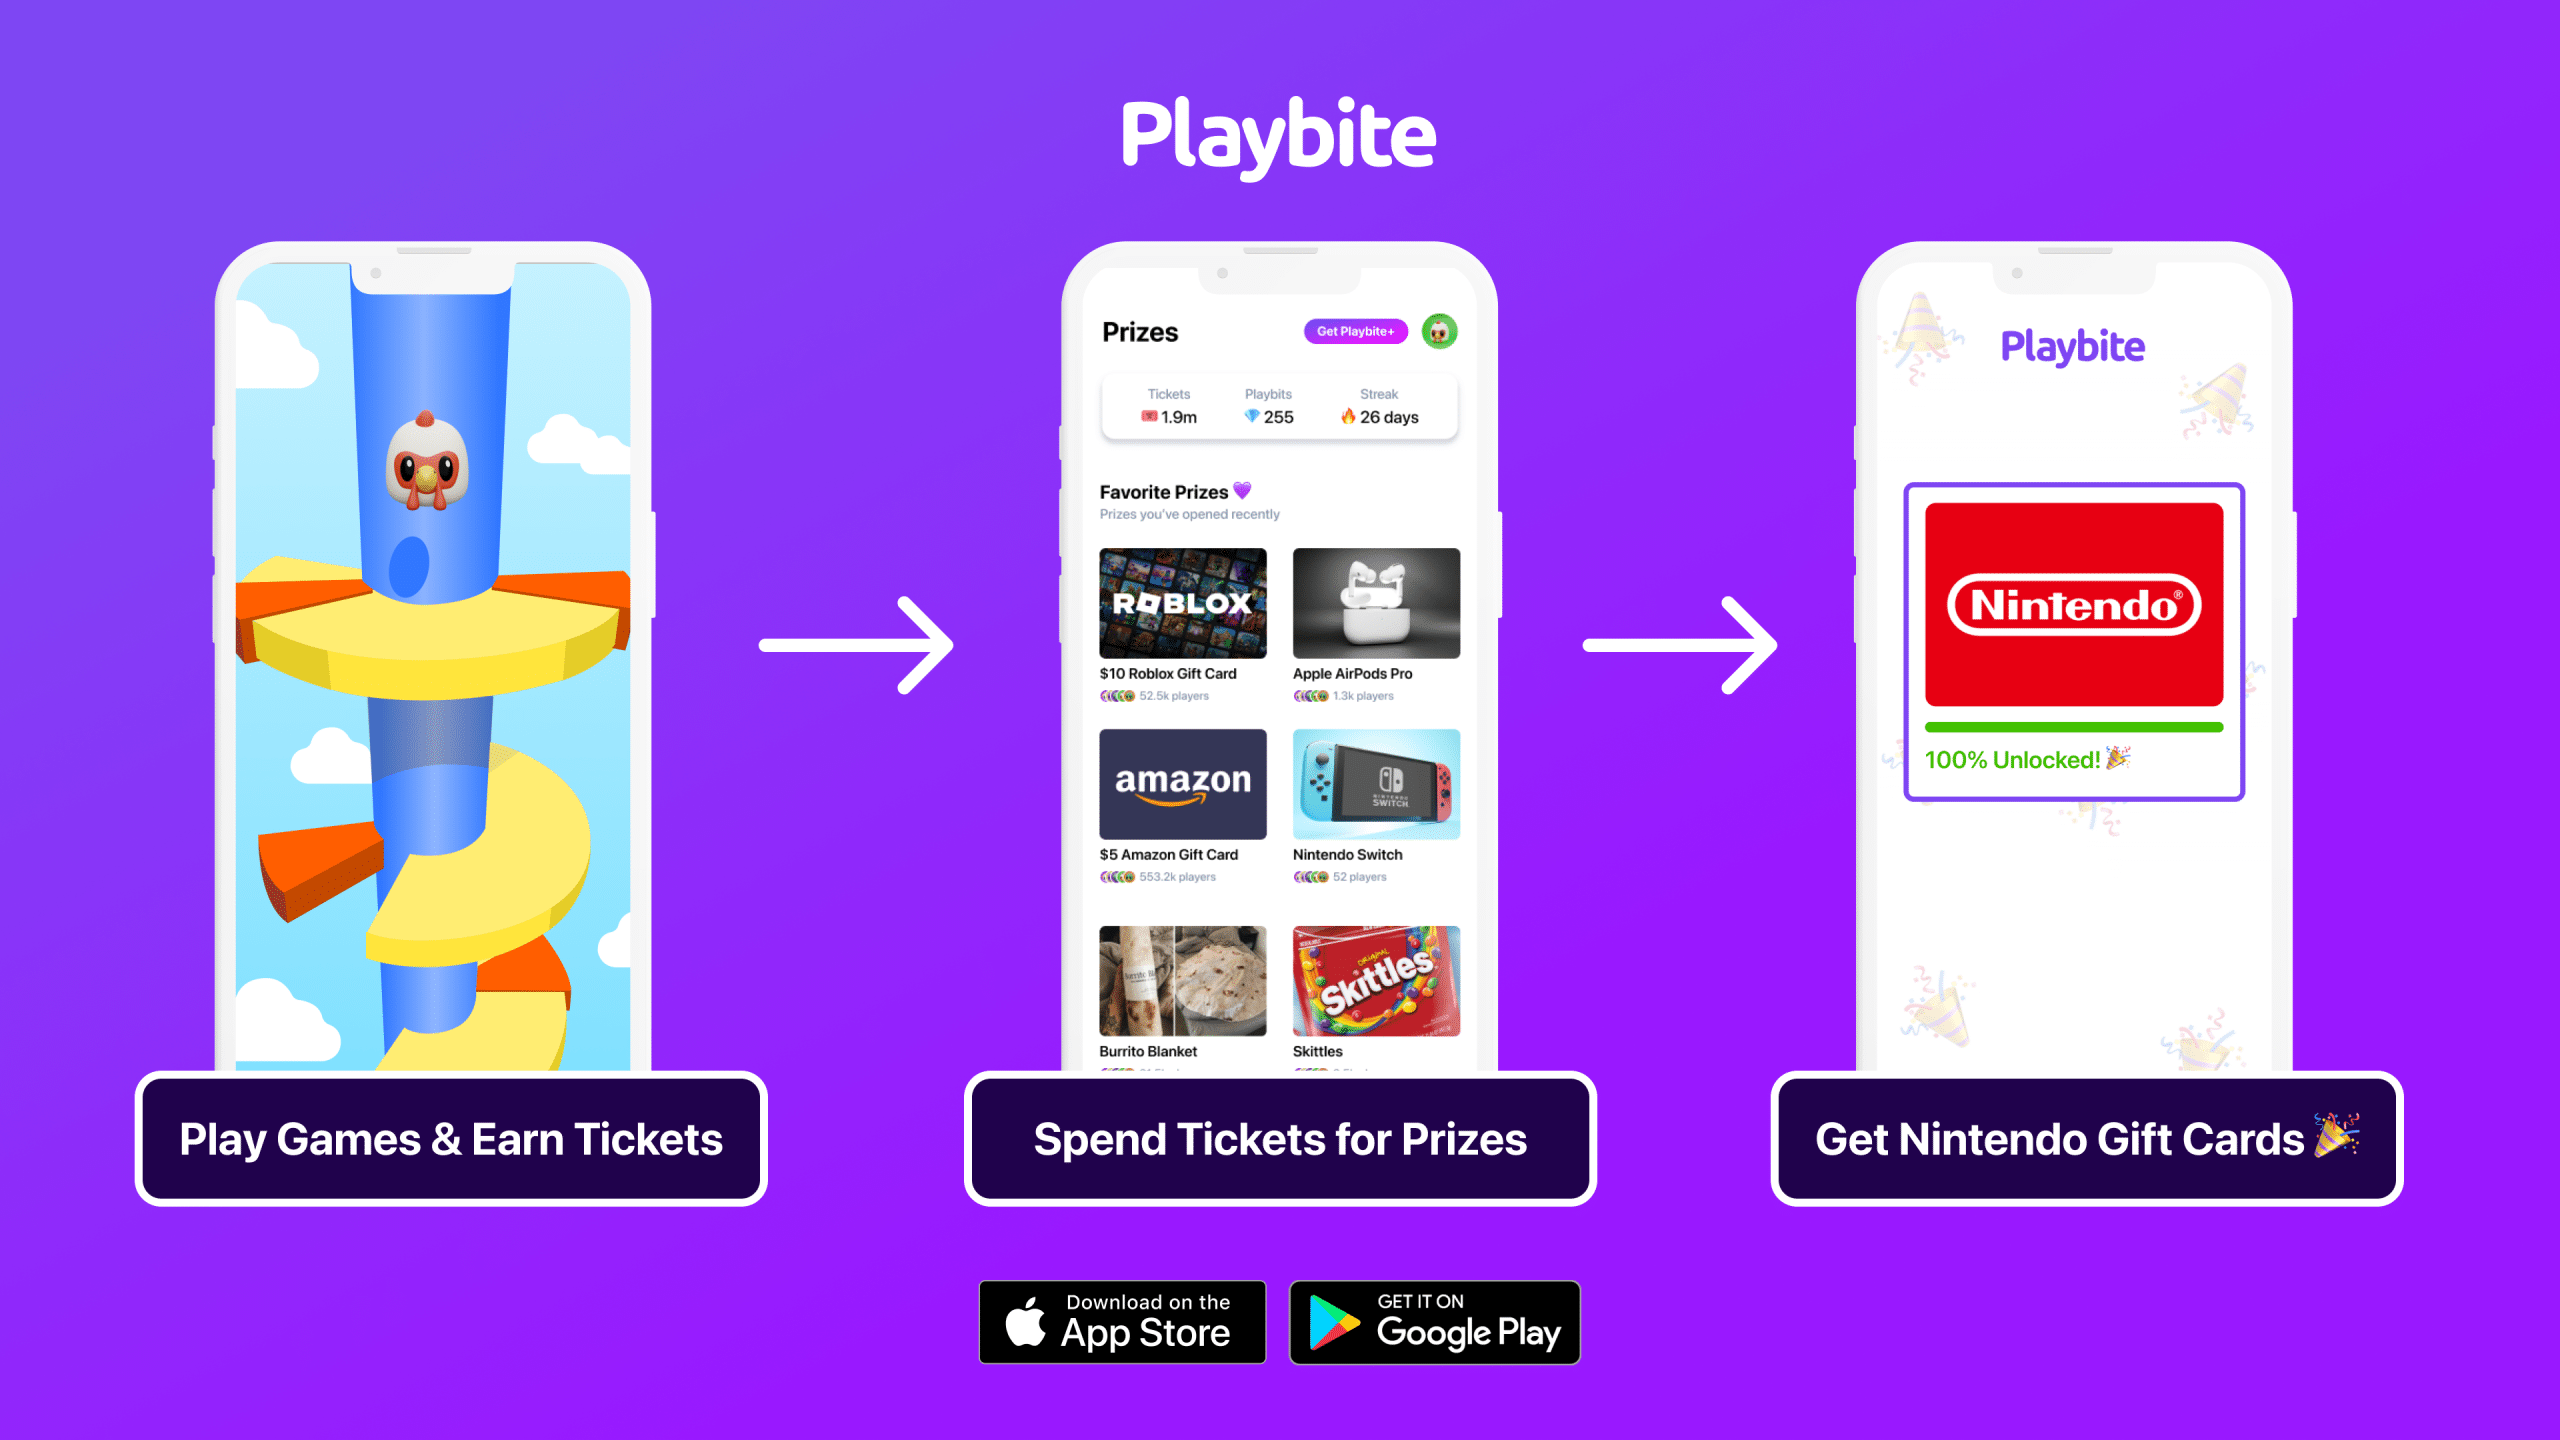 Win official Nintendo gift cards by playing games on Playbite!